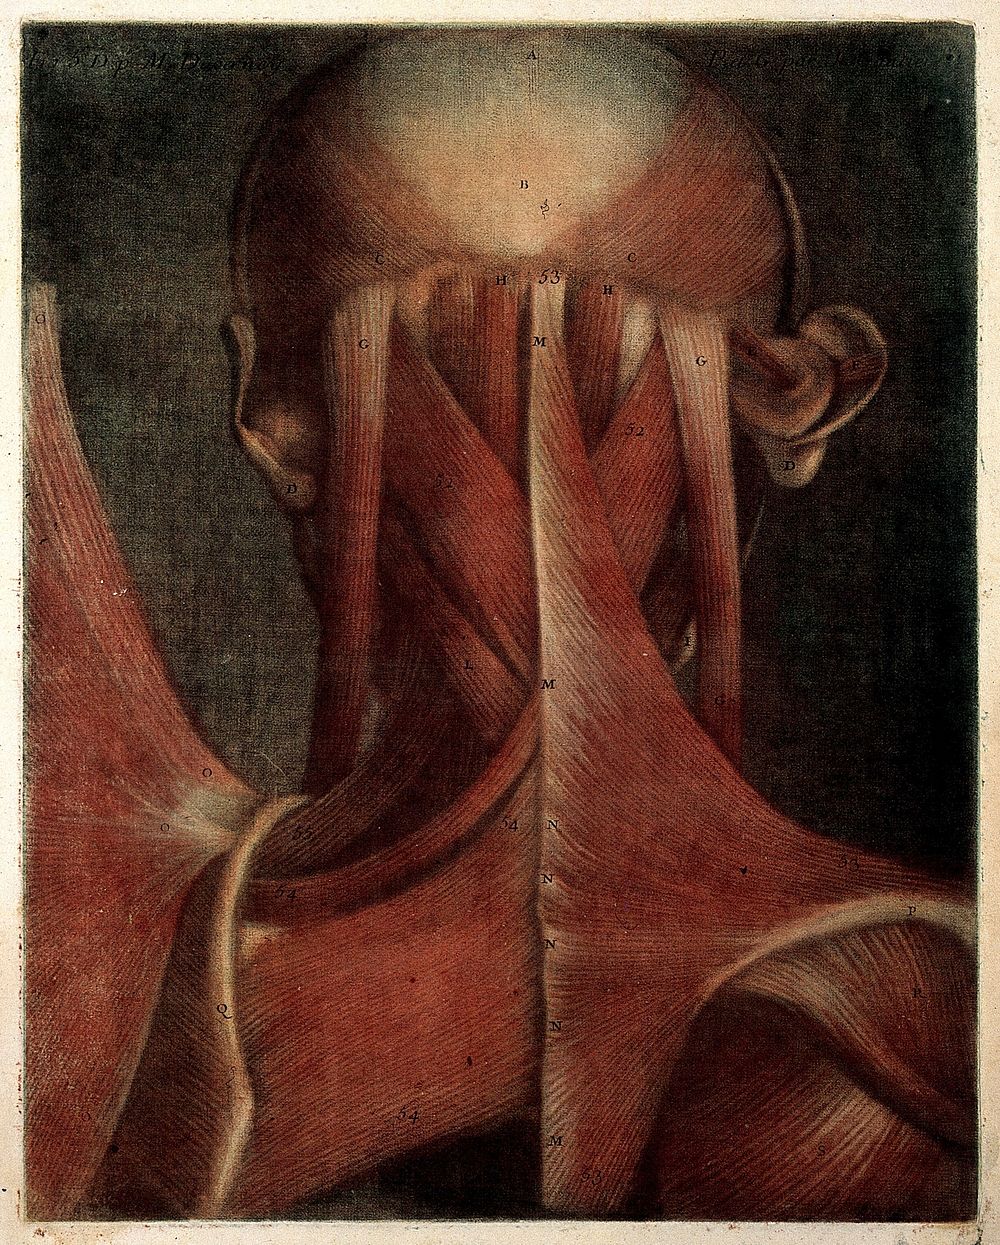 Muscles of the head, neck and shoulders. Colour mezzotint by J. F. Gautier d'Agoty after himself, 1745-1746.